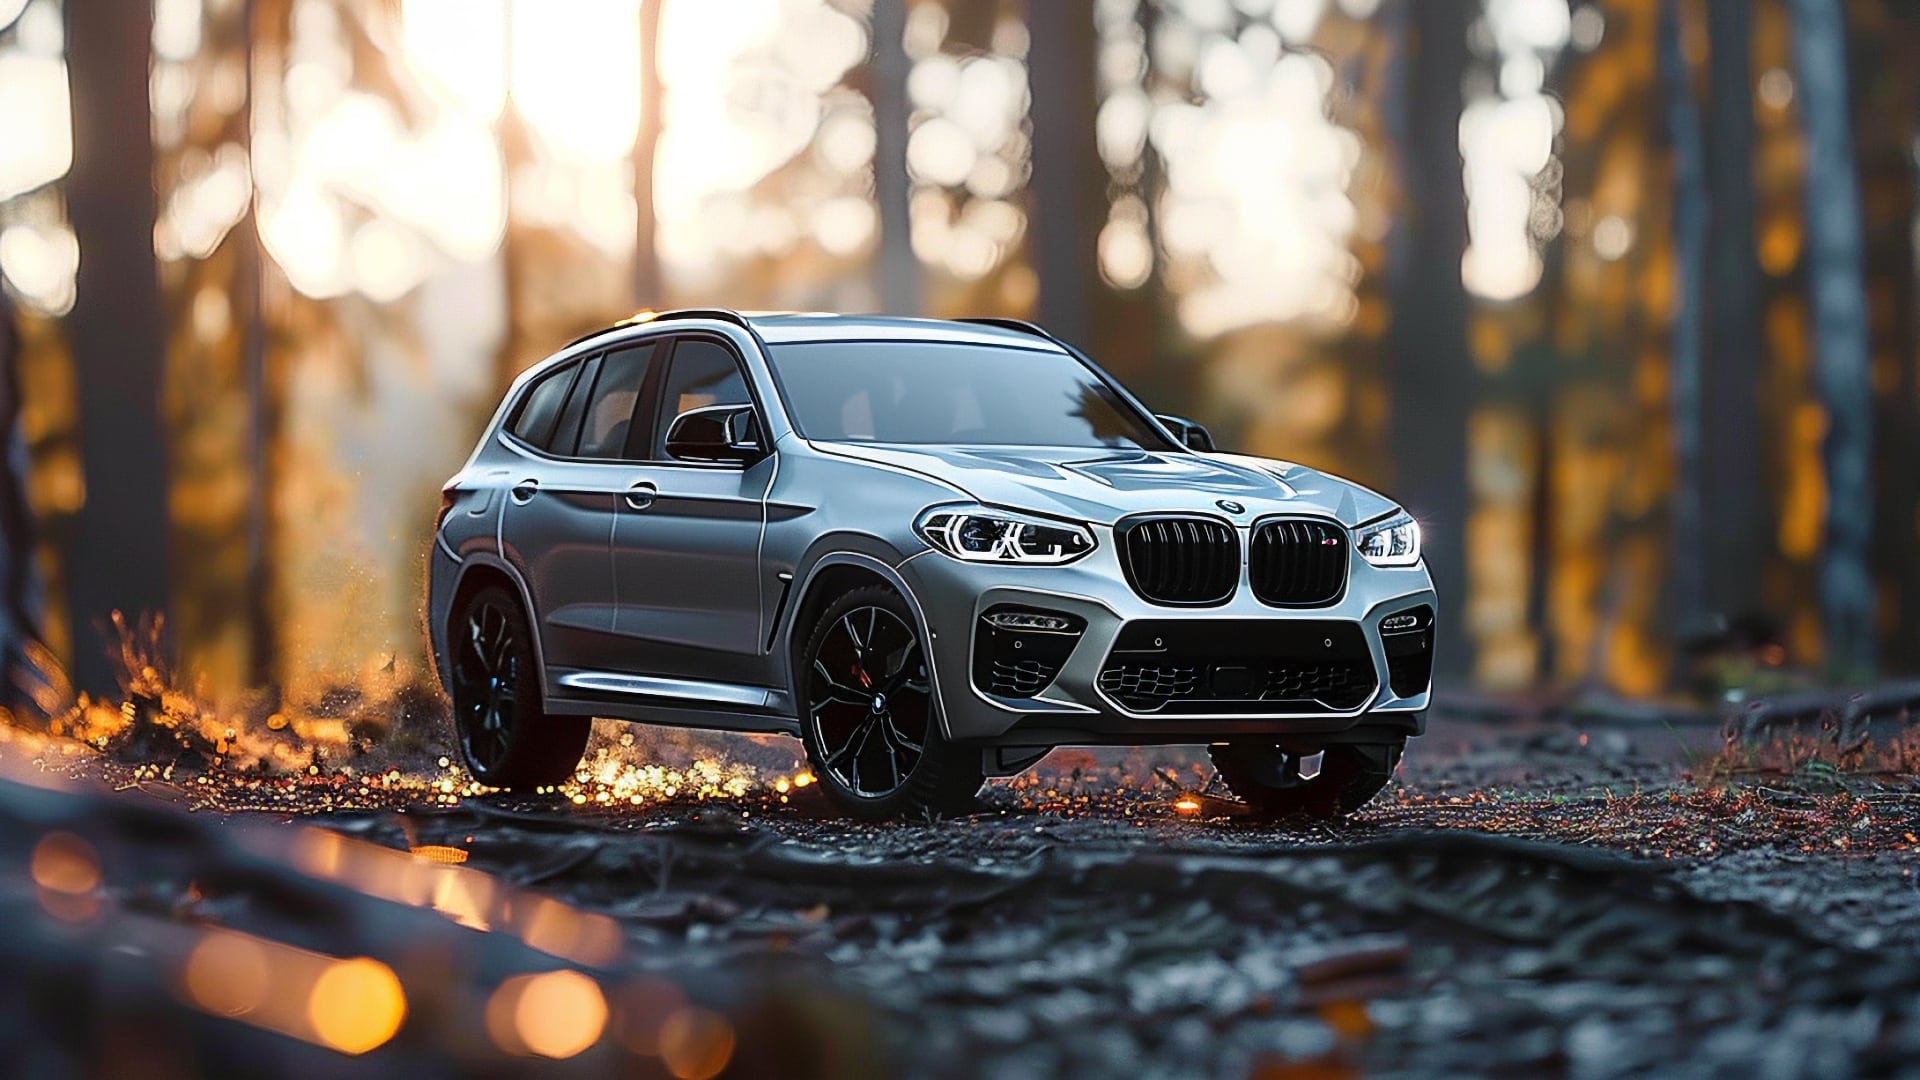 The BMW X3 is cruising through the woods.